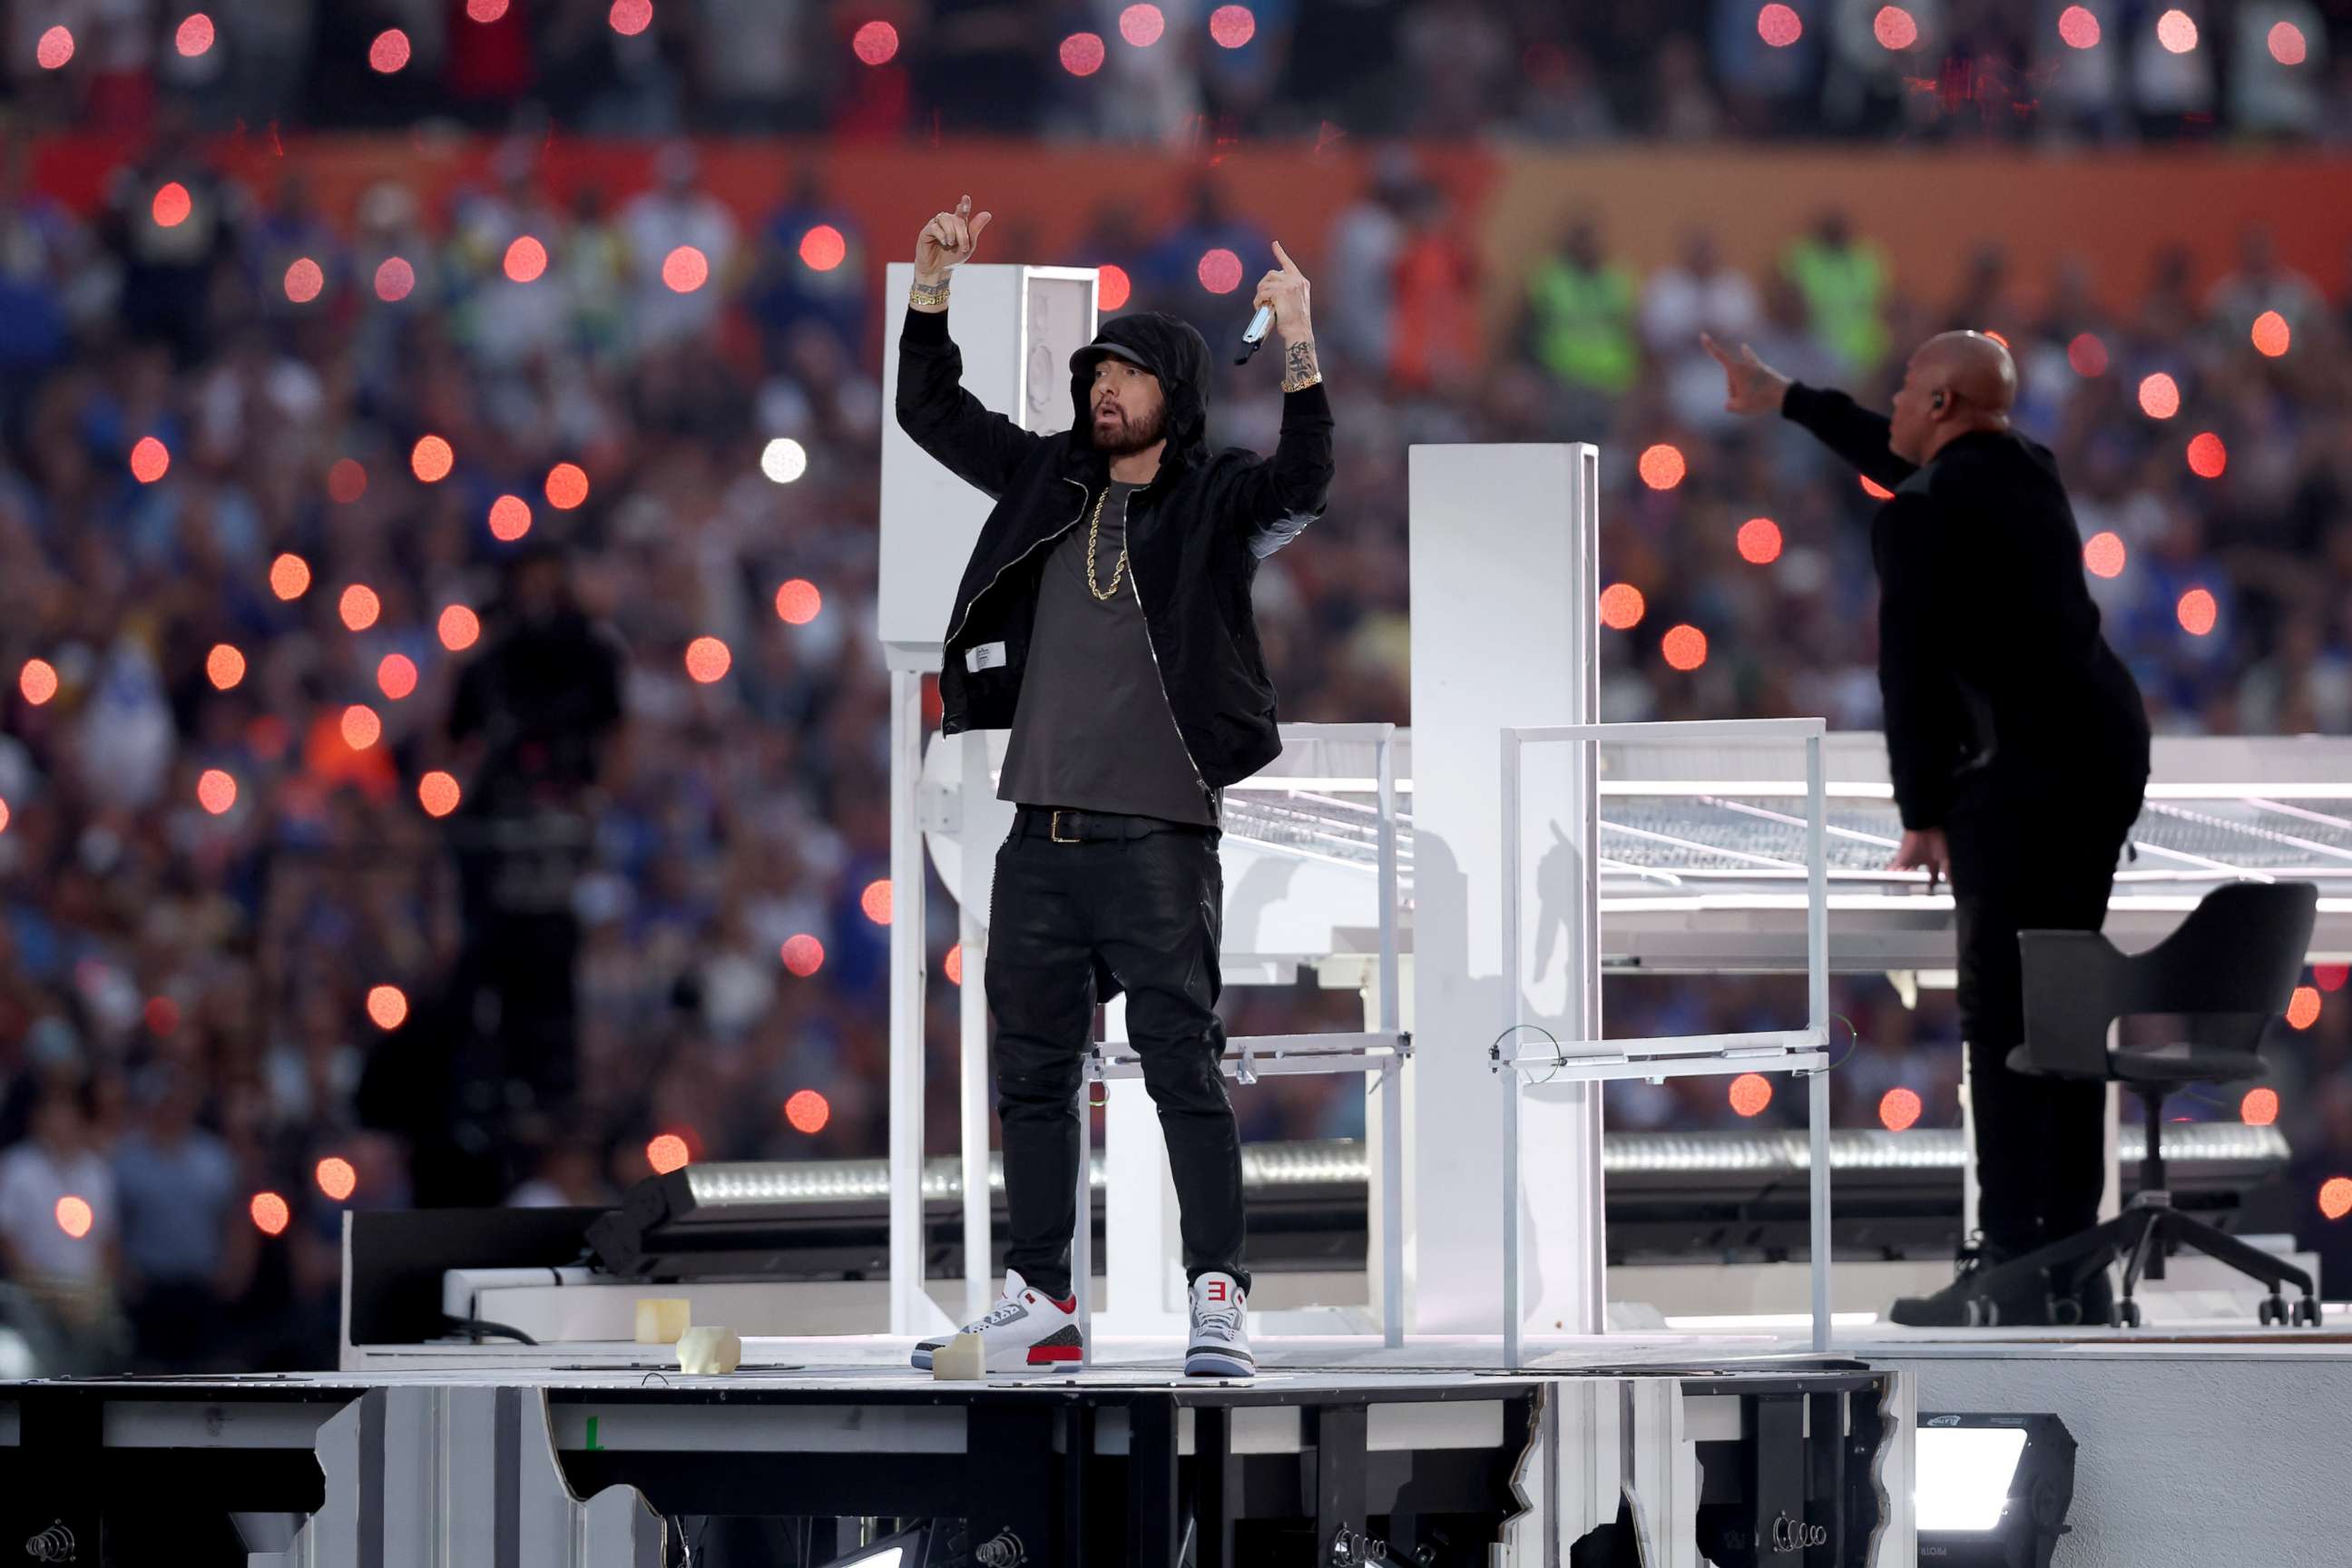 PHOTO: INGLEWOOD, CALIFORNIA - FEBRUARY 13: Eminem performs during the Pepsi Super Bowl LVI Halftime Show at SoFi Stadium on February 13, 2022 in Inglewood, California. (Photo by Rob Carr/Getty Images)